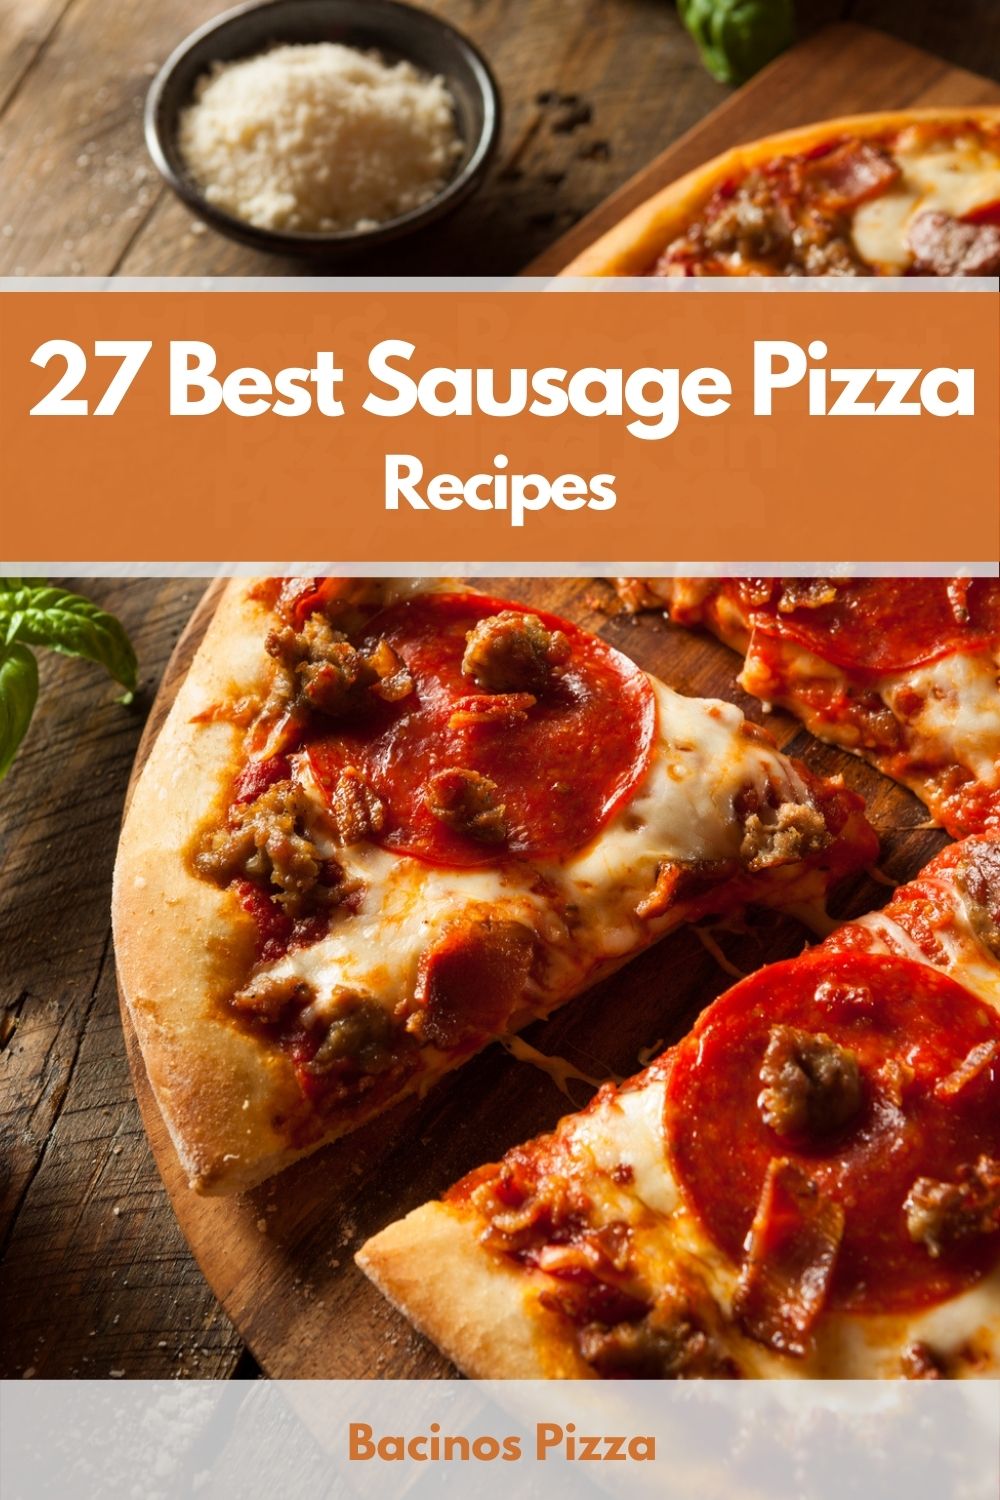 27 Best Sausage Pizza Recipes pin